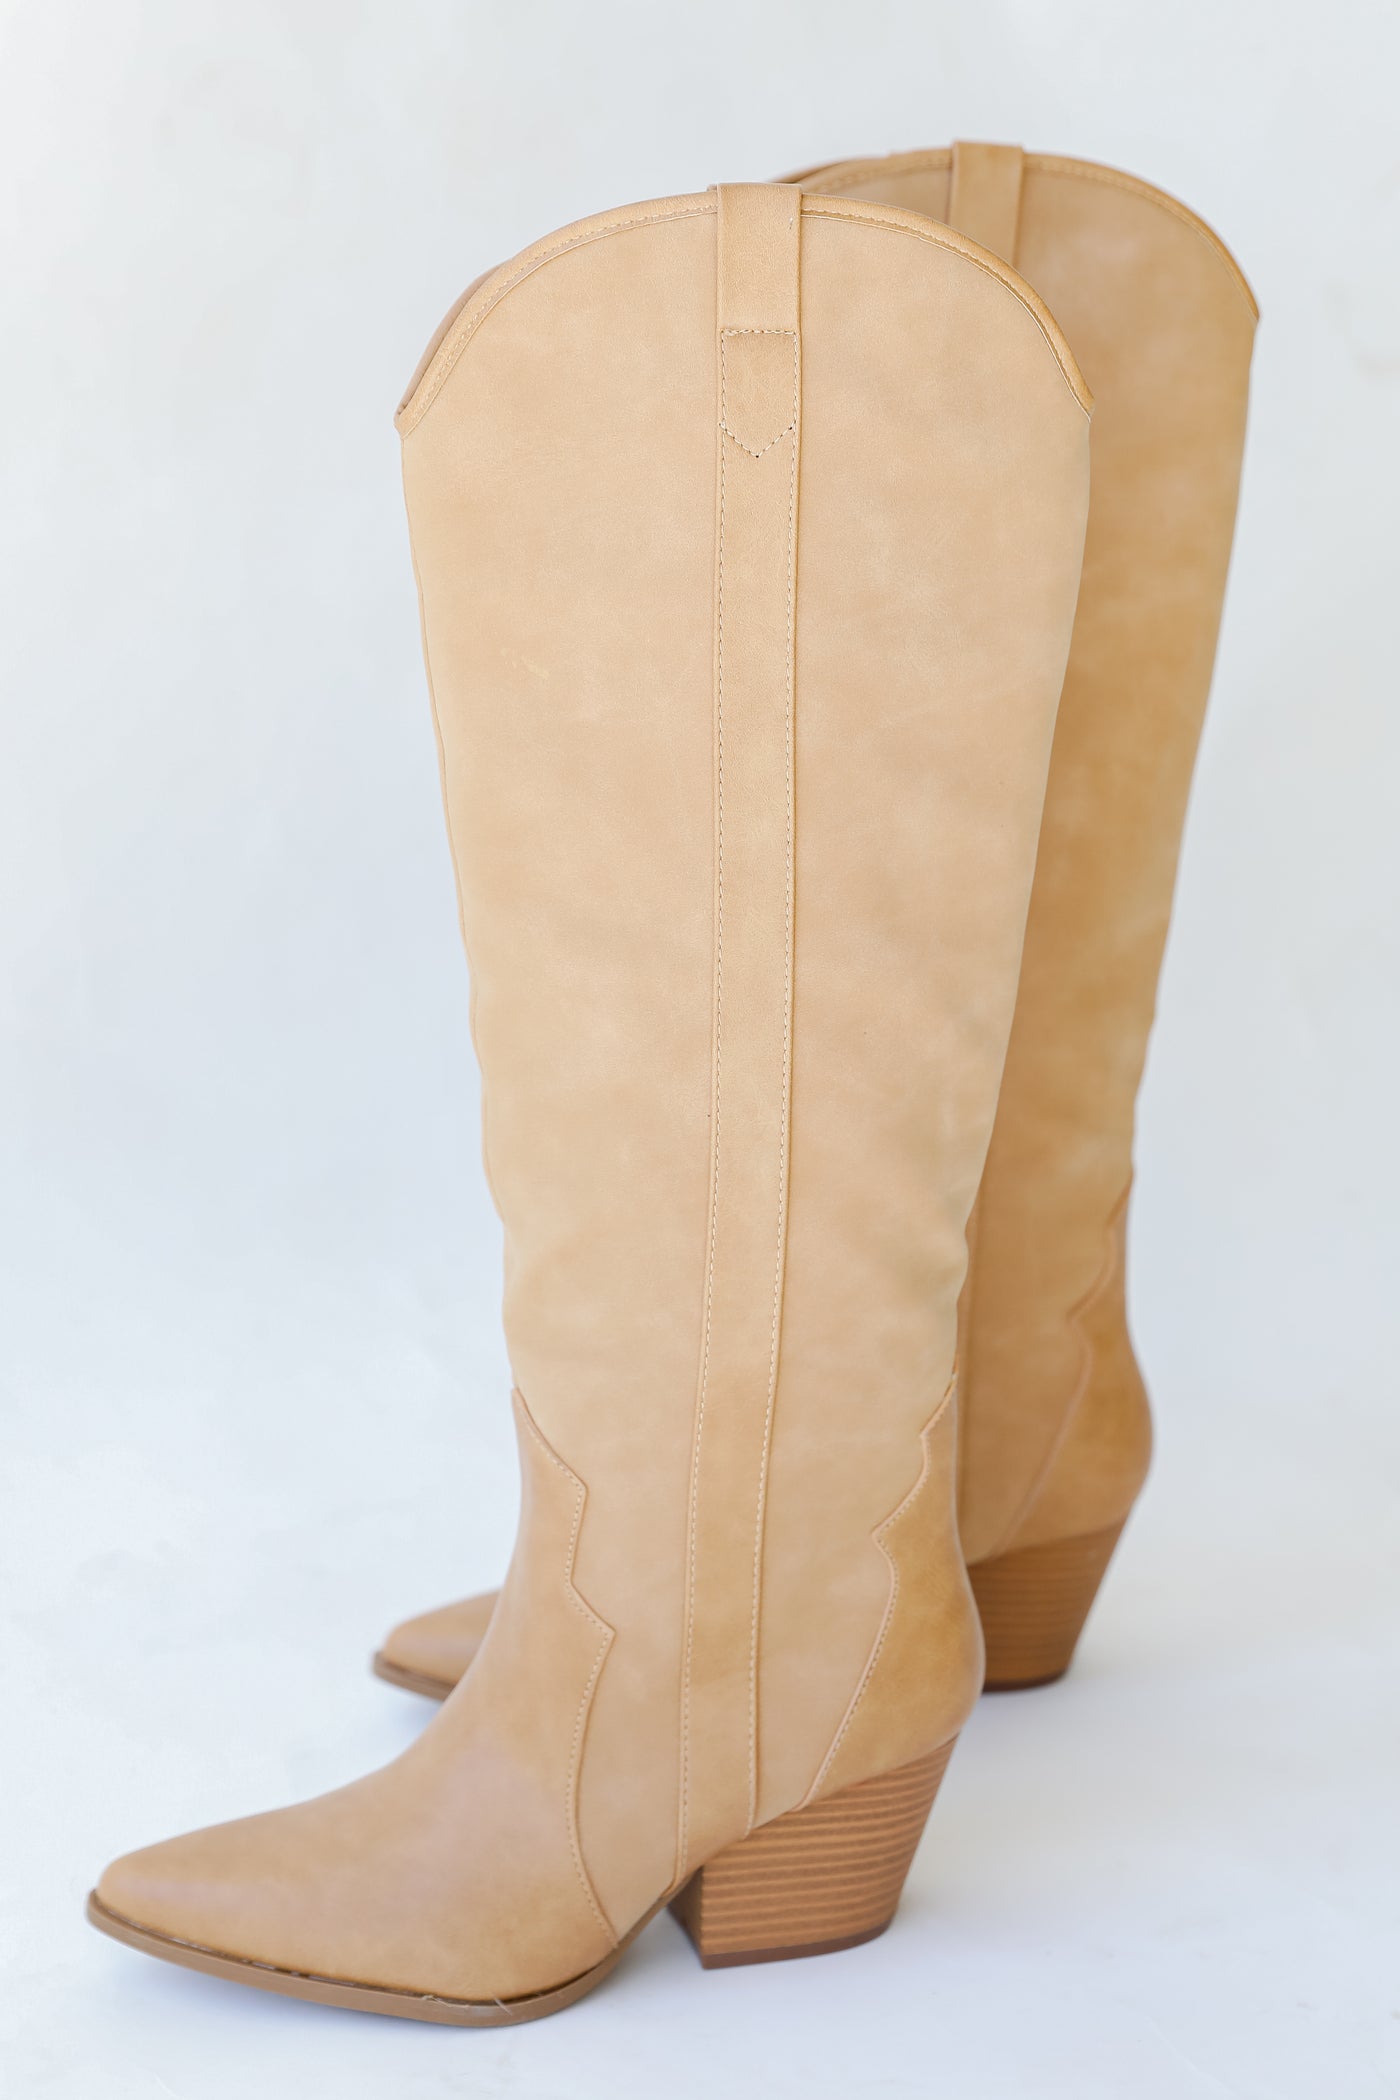 tan Western Knee High Boots side view